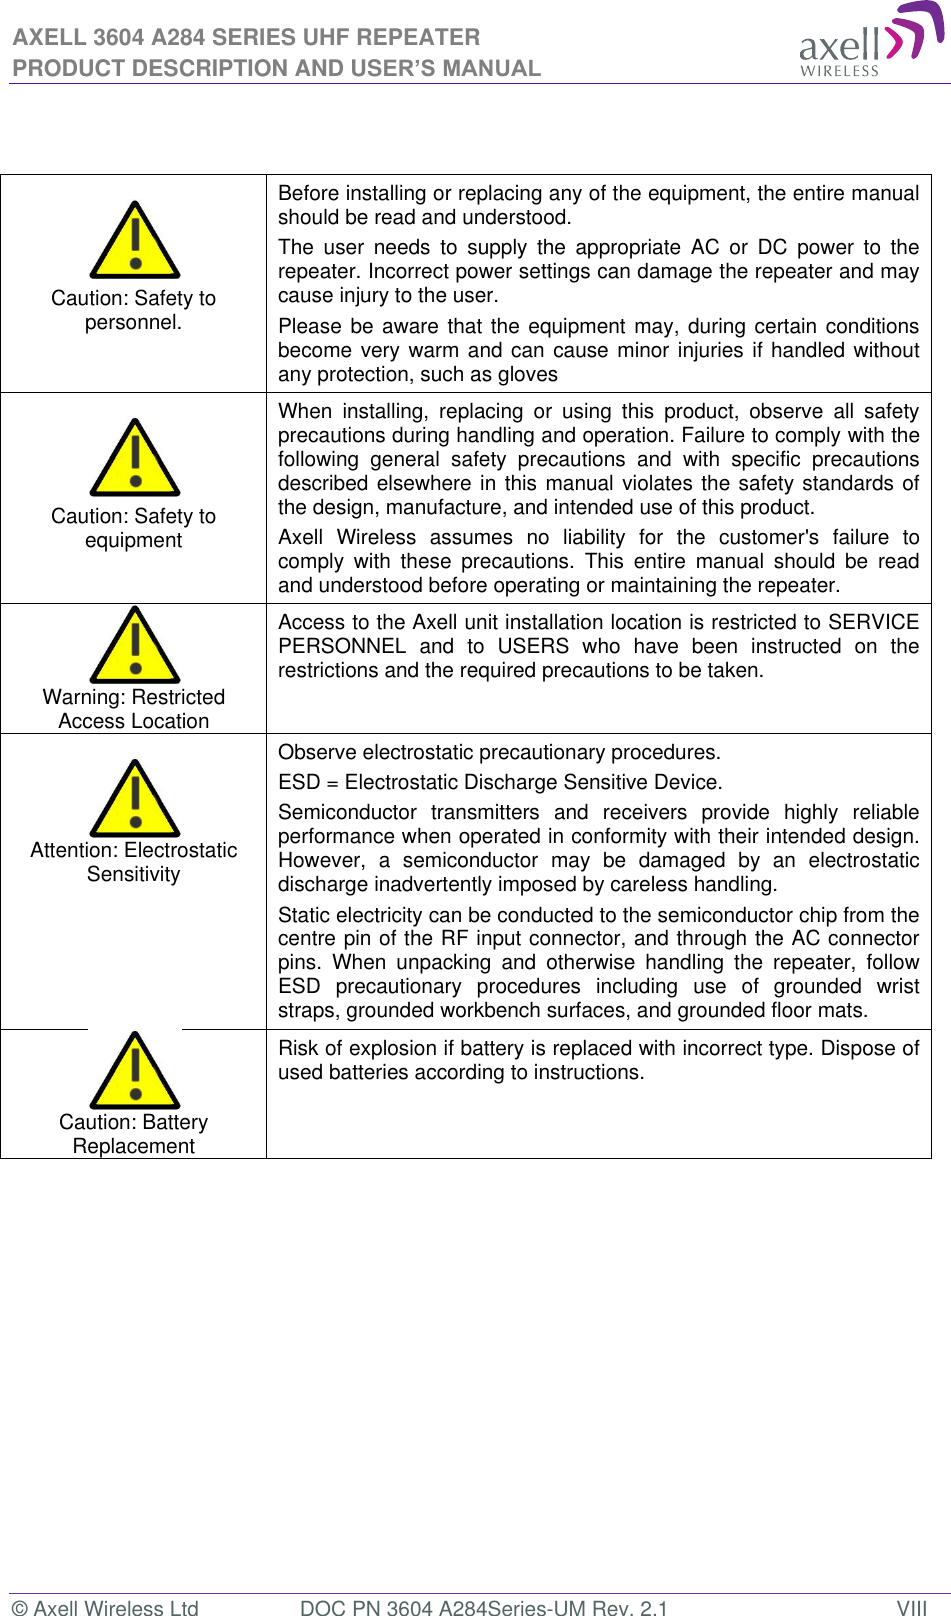 AXELL 3604 A284 SERIES UHF REPEATER PRODUCT DESCRIPTION AND USER’S MANUAL © Axell Wireless Ltd  DOC PN 3604 A284Series-UM Rev. 2.1  VIII                 Caution: Safety to personnel. Before installing or replacing any of the equipment, the entire manual should be read and understood. The  user  needs  to  supply  the  appropriate  AC  or  DC  power  to  the repeater. Incorrect power settings can damage the repeater and may cause injury to the user. Please be aware that the equipment may, during certain conditions become very warm and can cause minor injuries if handled without any protection, such as gloves   Caution: Safety to equipment When  installing,  replacing  or  using  this  product,  observe  all  safety precautions during handling and operation. Failure to comply with the following  general  safety  precautions  and  with  specific  precautions described elsewhere in this manual violates the safety standards of the design, manufacture, and intended use of this product.  Axell  Wireless  assumes  no  liability  for  the  customer&apos;s  failure  to comply  with  these  precautions.  This  entire  manual  should  be  read and understood before operating or maintaining the repeater.  Warning: Restricted Access Location Access to the Axell unit installation location is restricted to SERVICE PERSONNEL  and  to  USERS  who  have  been  instructed  on  the restrictions and the required precautions to be taken.   Attention: Electrostatic Sensitivity  Observe electrostatic precautionary procedures. ESD = Electrostatic Discharge Sensitive Device.  Semiconductor  transmitters  and  receivers  provide  highly  reliable performance when operated in conformity with their intended design. However,  a  semiconductor  may  be  damaged  by  an  electrostatic discharge inadvertently imposed by careless handling. Static electricity can be conducted to the semiconductor chip from the centre pin of the RF input connector, and through the AC connector pins.  When  unpacking  and  otherwise  handling  the  repeater,  follow ESD  precautionary  procedures  including  use  of  grounded  wrist straps, grounded workbench surfaces, and grounded floor mats.  Caution: Battery Replacement Risk of explosion if battery is replaced with incorrect type. Dispose of used batteries according to instructions. 